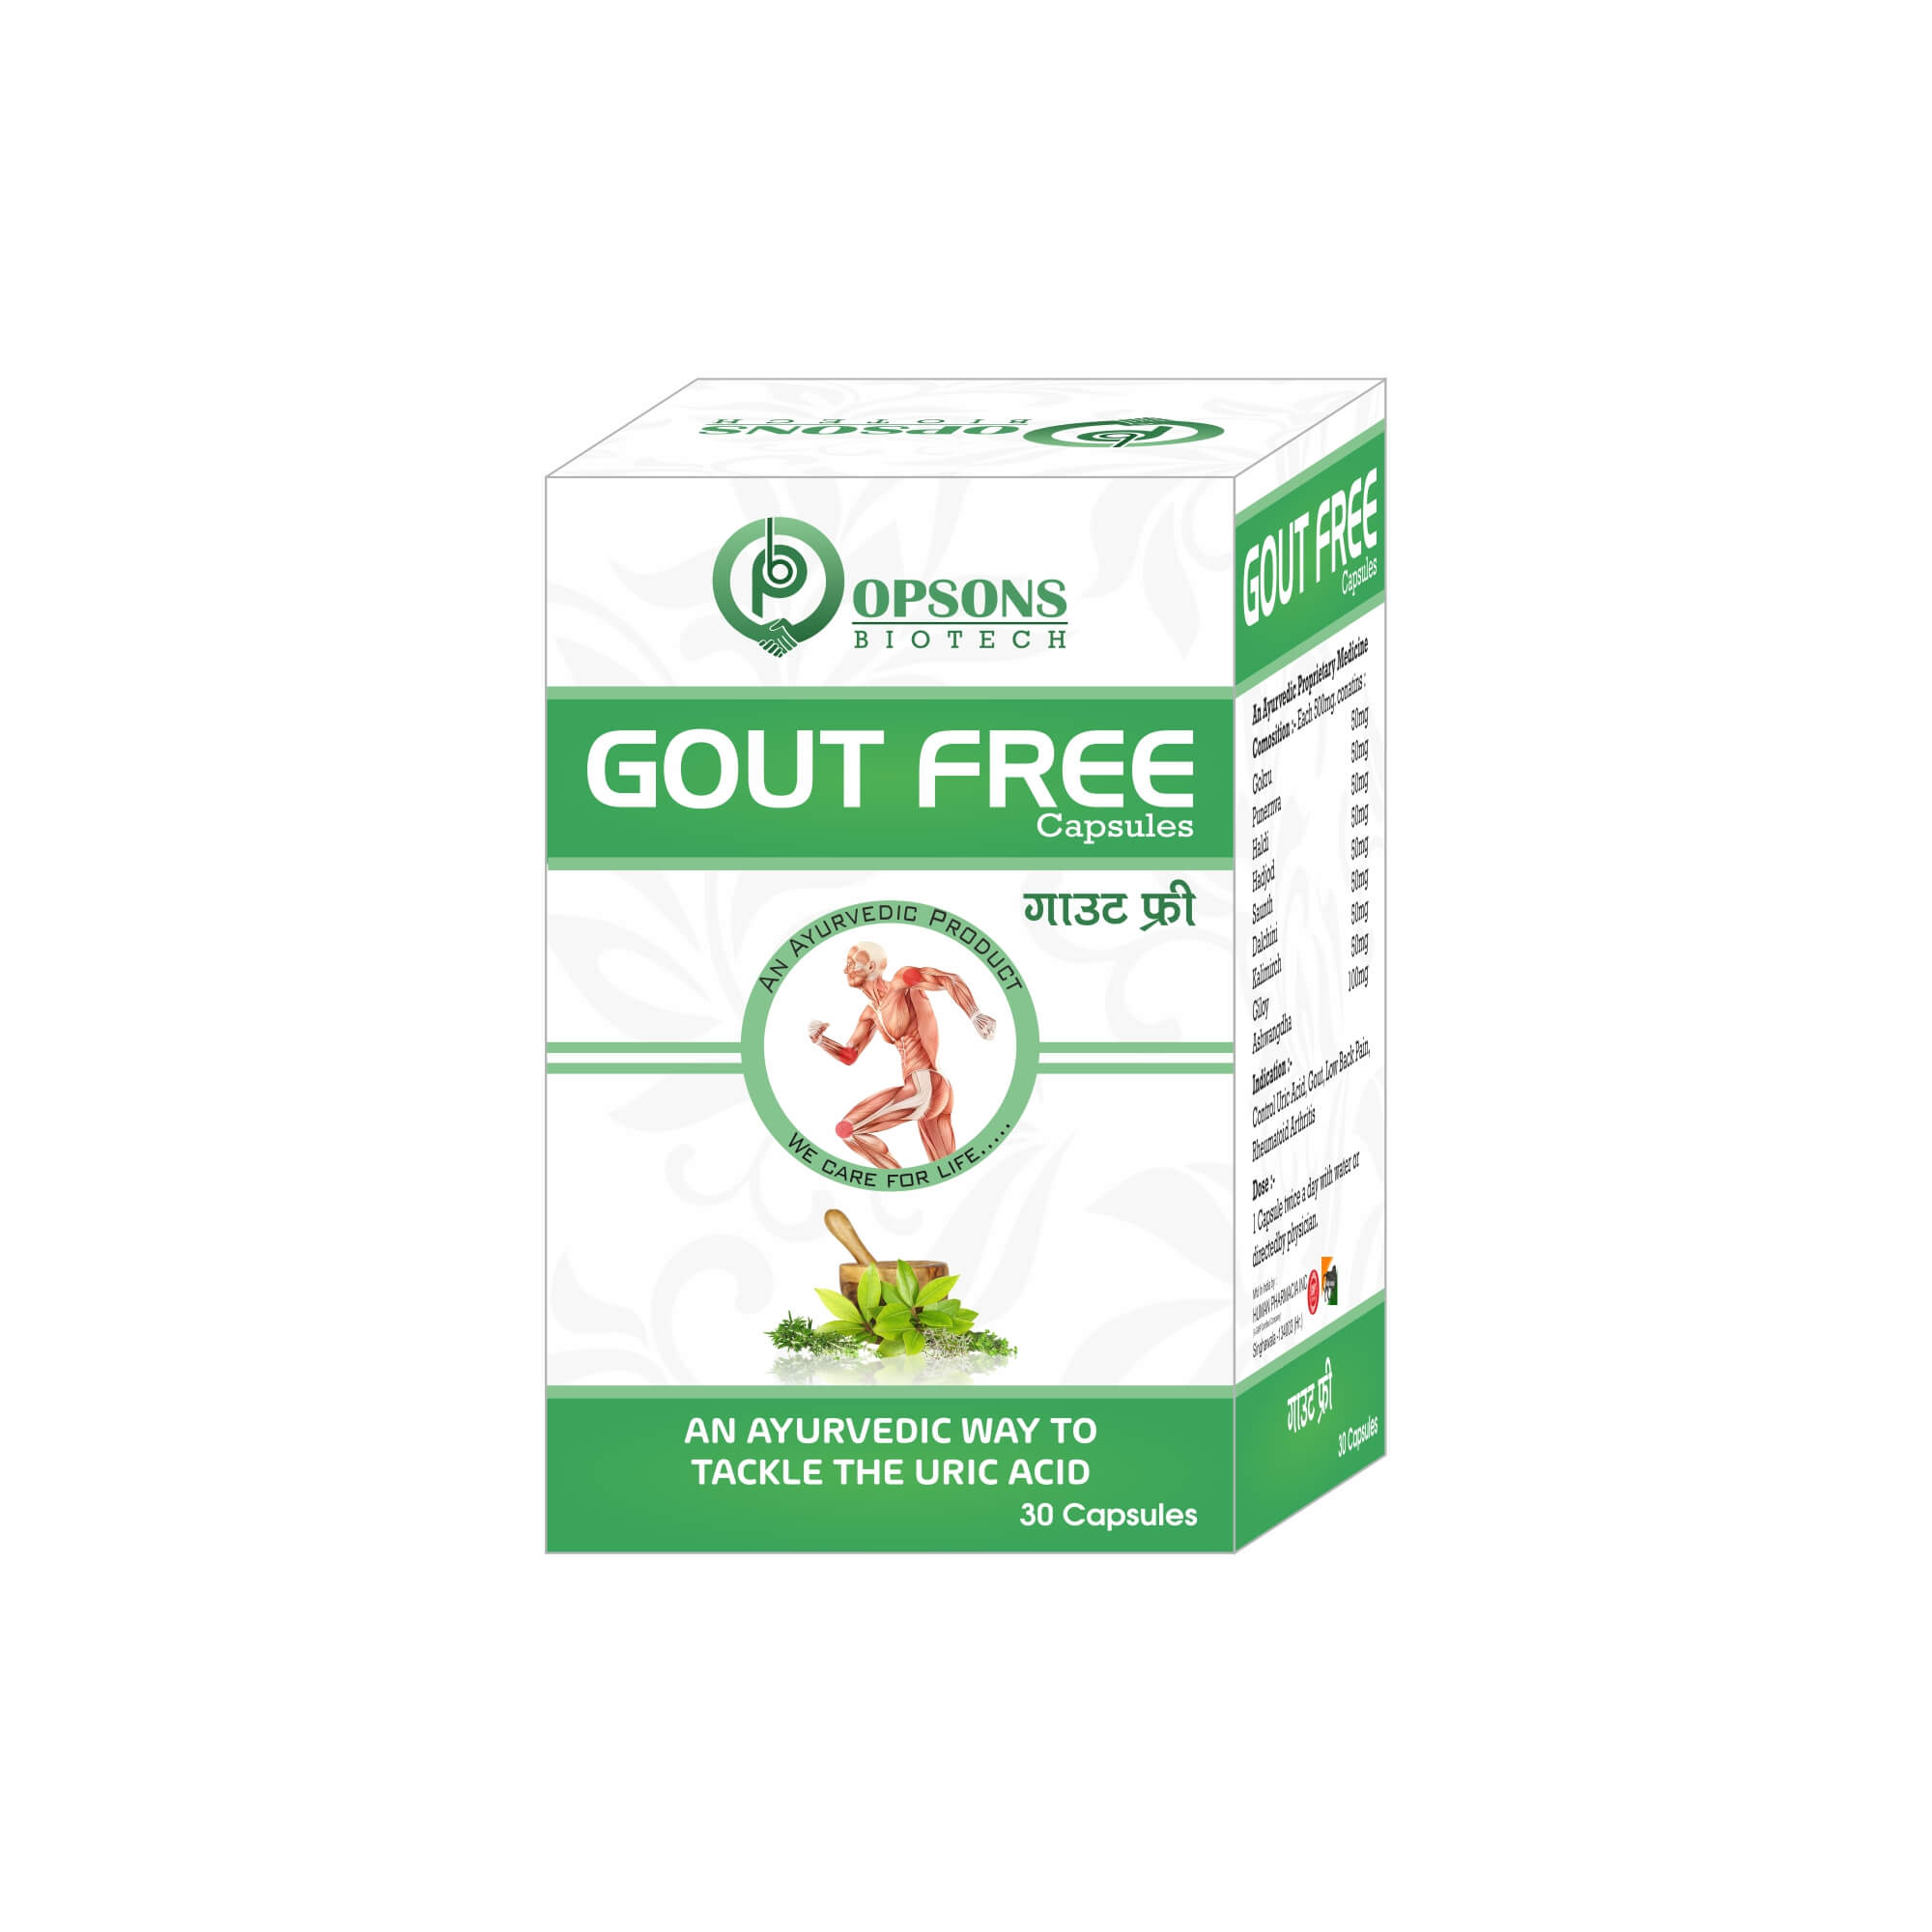 Product Name: Gout free capsules, Compositions of An Ayurvedic Way To Tackle The Uric Acid are An Ayurvedic Way To Tackle The Uric Acid - Opsons Biotech